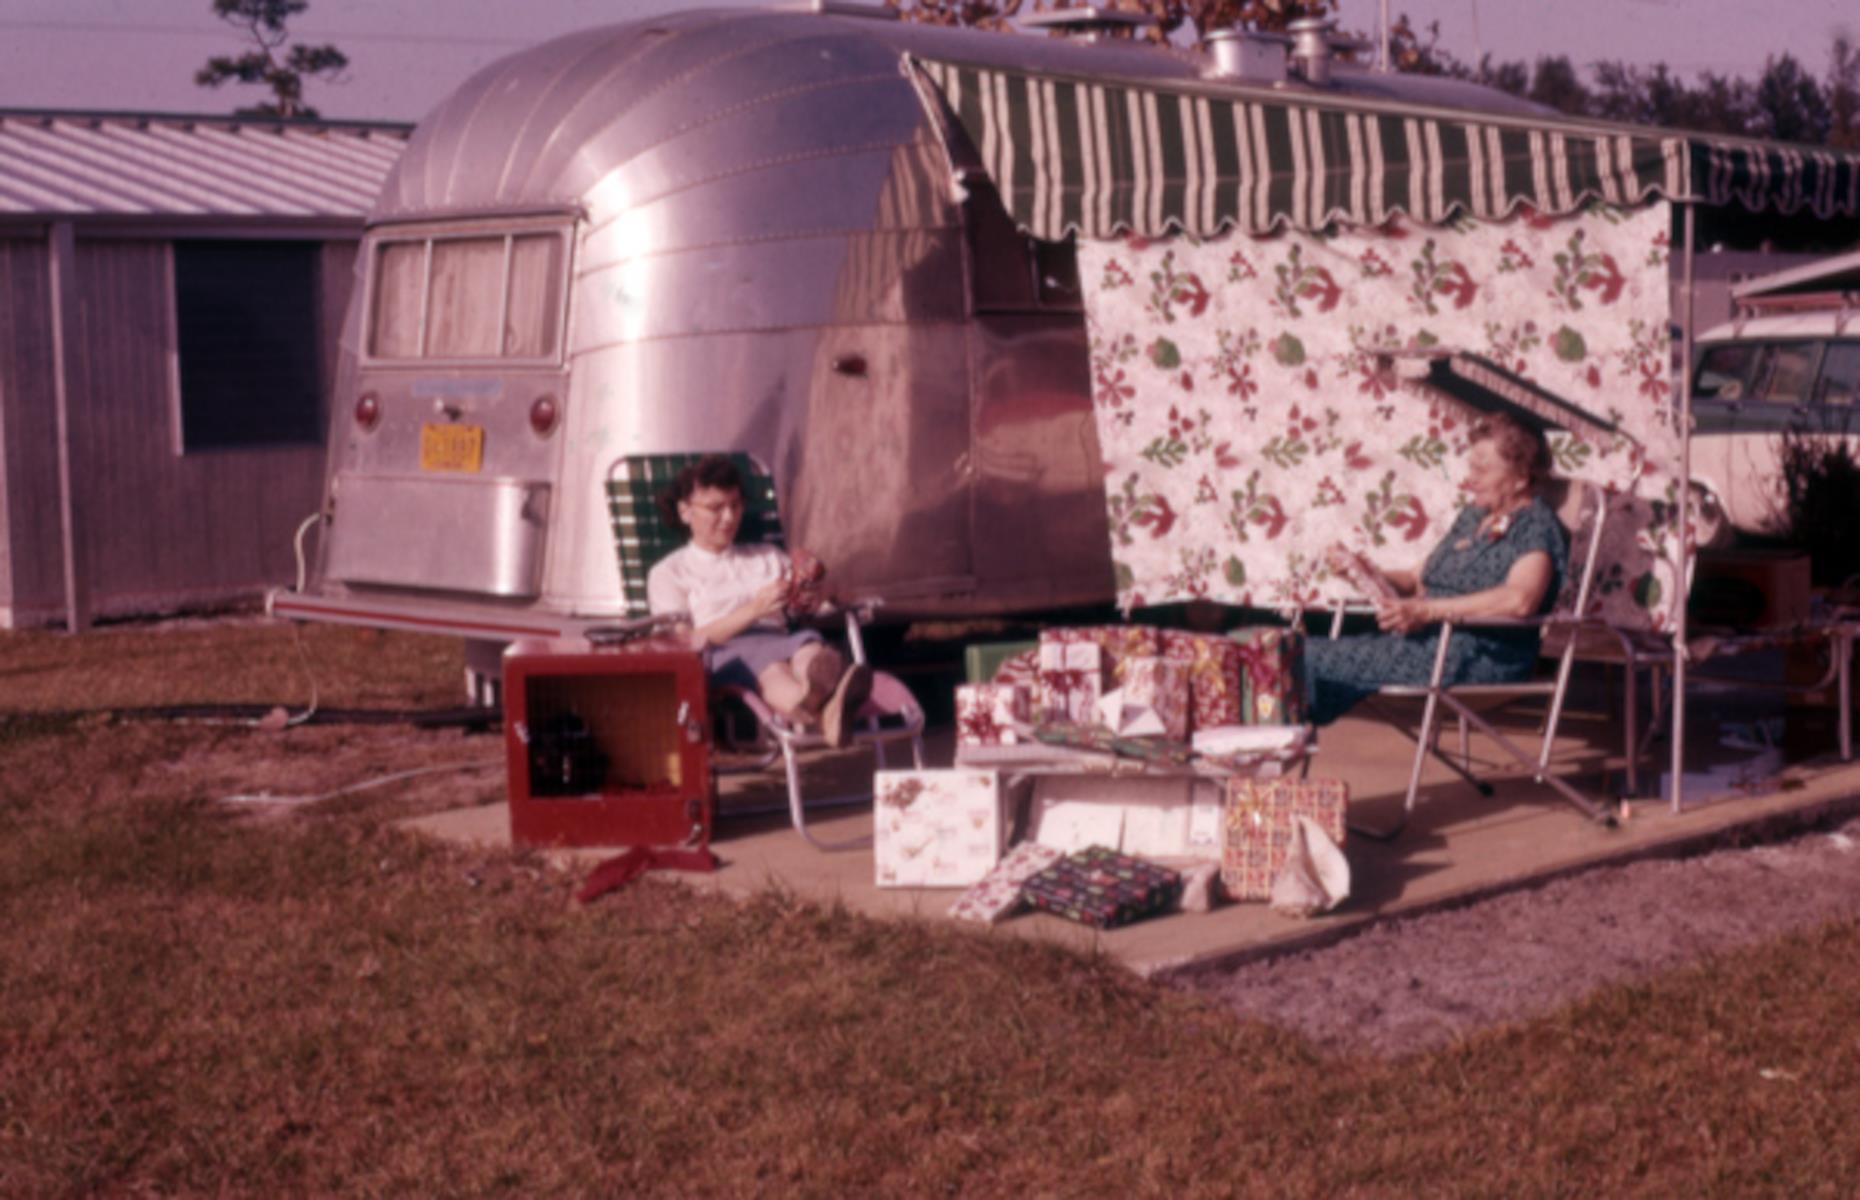 <p>Airstreams have been a favourite home-on-the-road for vacationers for almost a century. Back in 1929, Wally Byam built the first Airstream trailer – a teardrop-shaped canvas and Masonite shelter attached to a Ford Model T chassis – mainly for his wife Marion, who was fed up camping in draughty tents.</p>  <p>A year later, Byam published a DIY guide to building a trailer, which was followed by floods of requests to construct RVs. To cope with the demand, Byam rented a factory in Culver City, California, officially founding his trailer manufacturing company in 1931.</p>